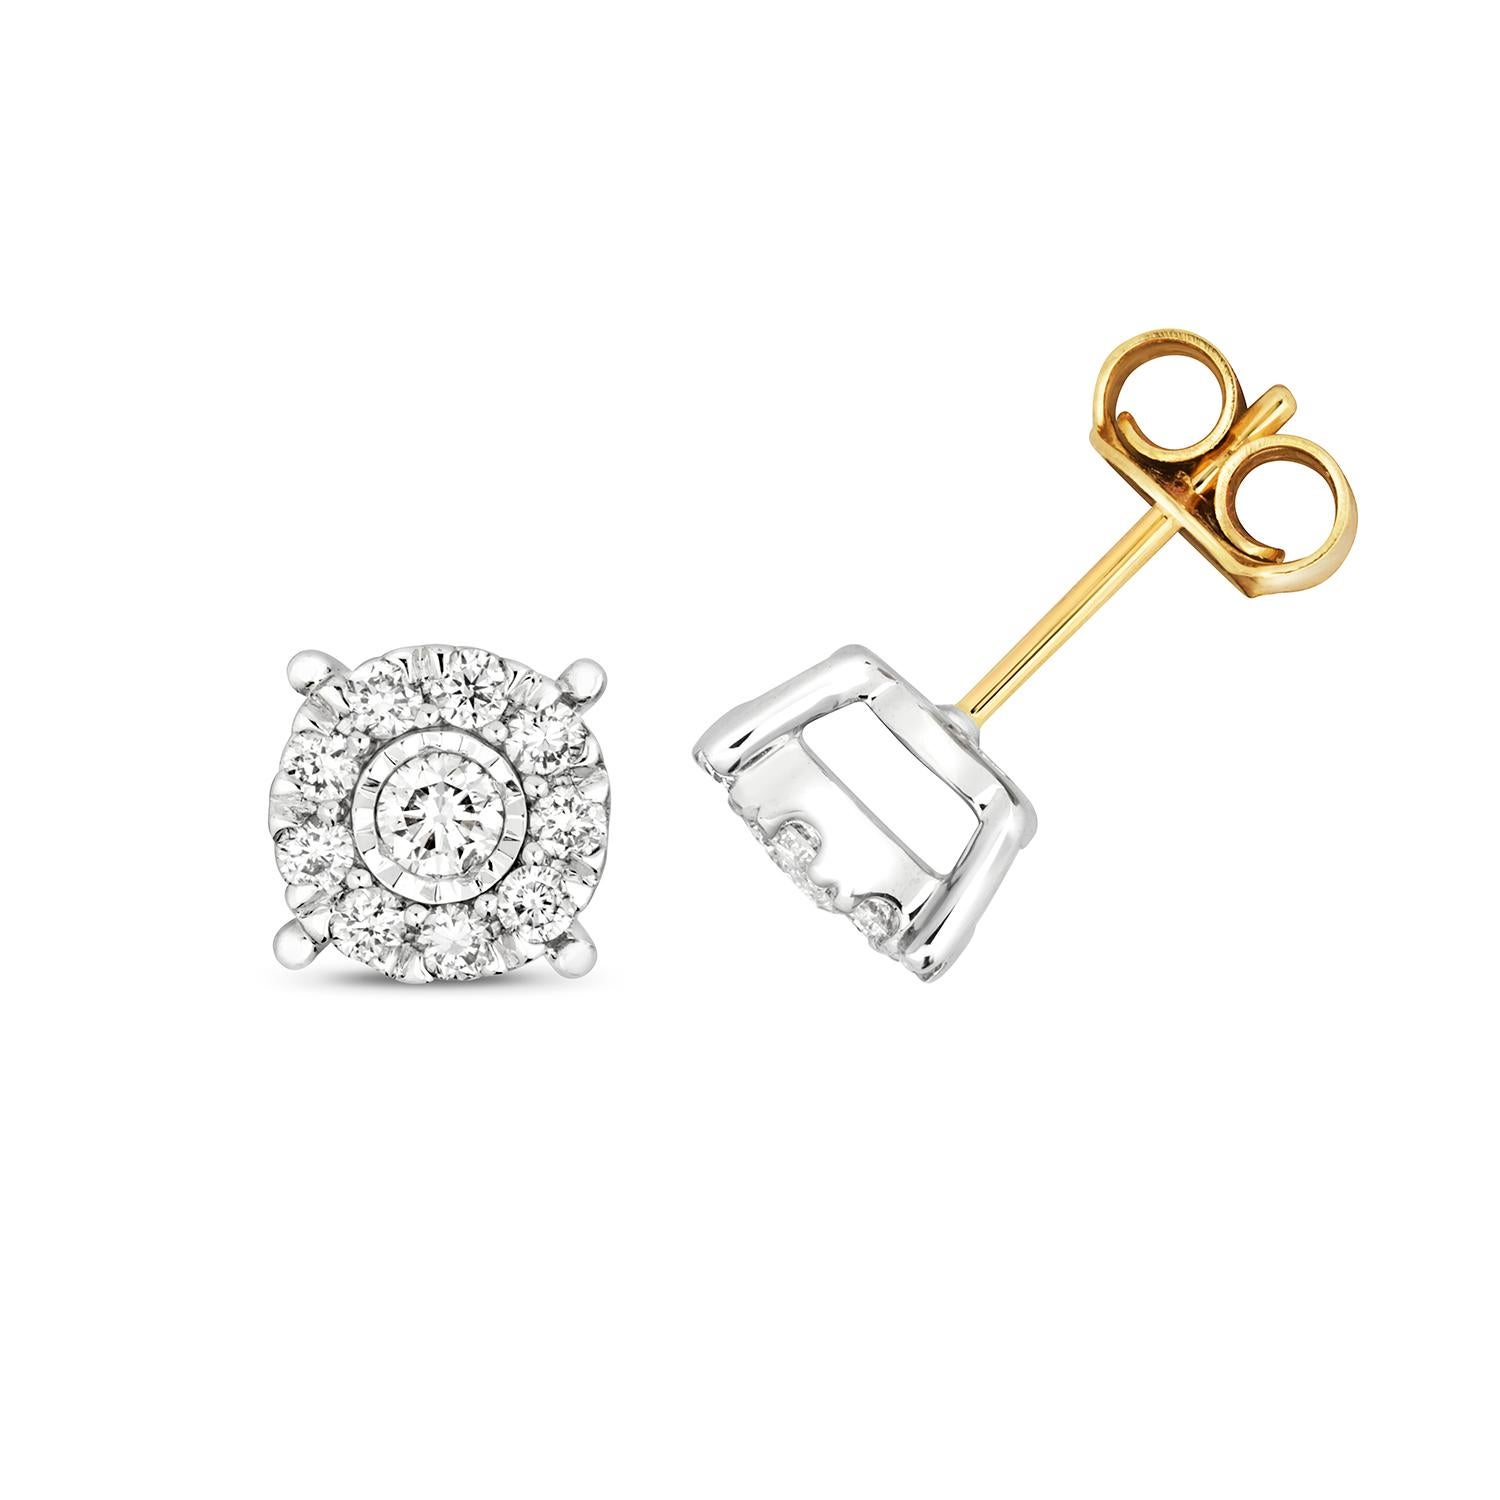 DIAMOND BRILLIANT ILLUSION STUDS

9CT Y/G H I1 0.41CT

Weight: 1.5g

Number Of Stones:20

Total Carates:0.400